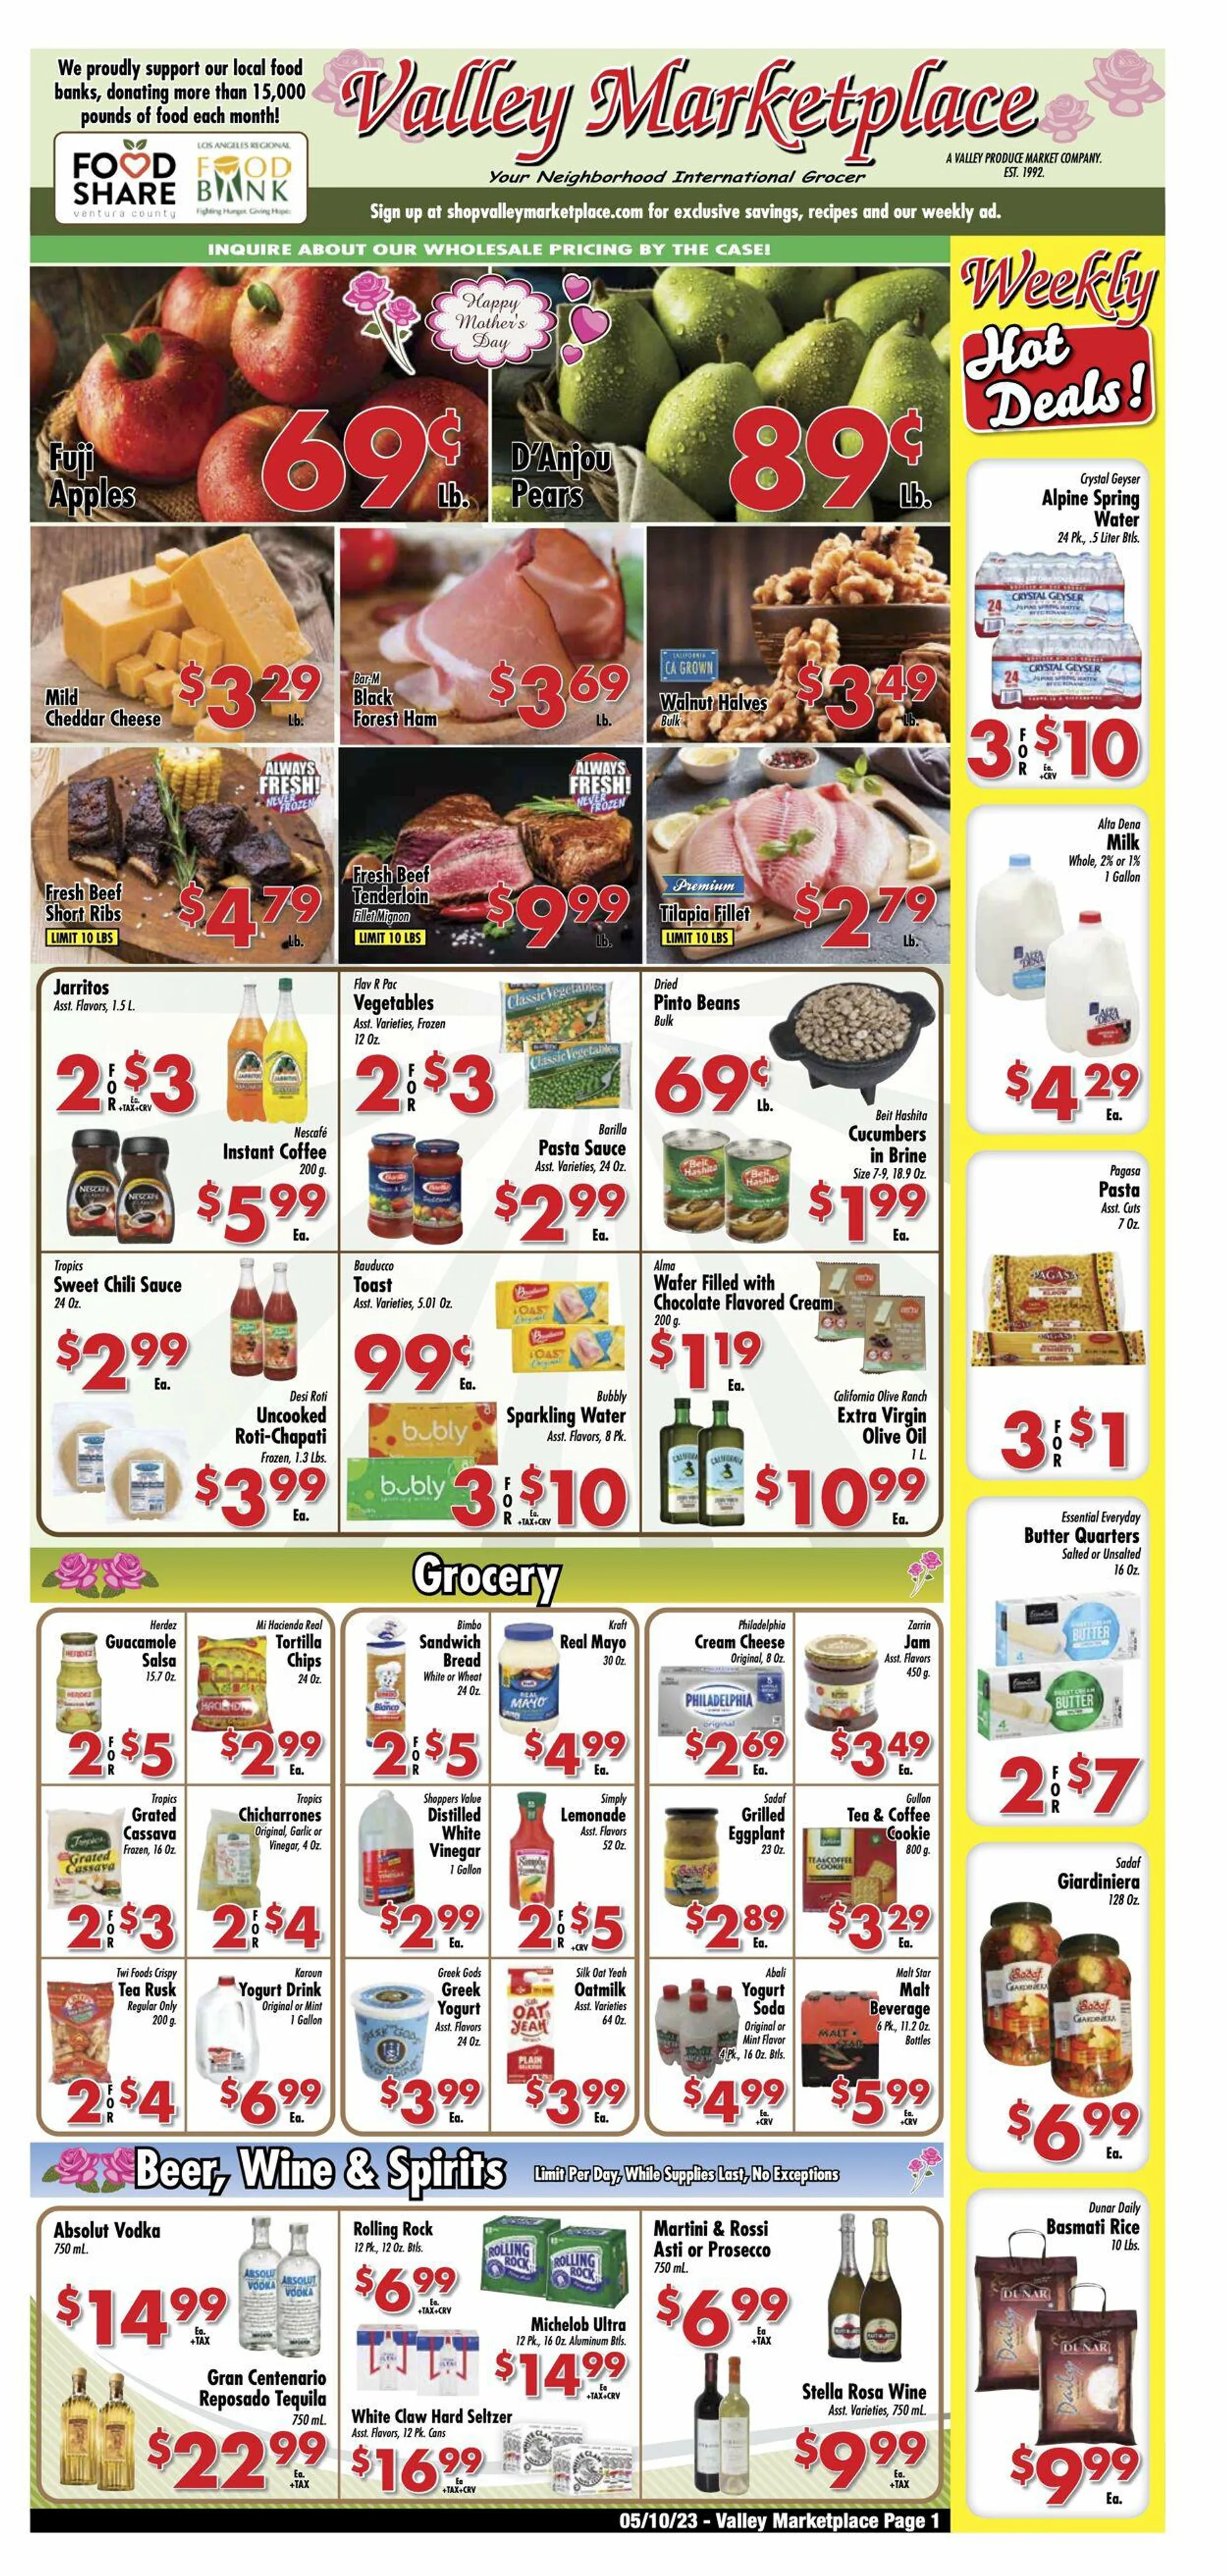 Valley Marketplace Current weekly ad - 1